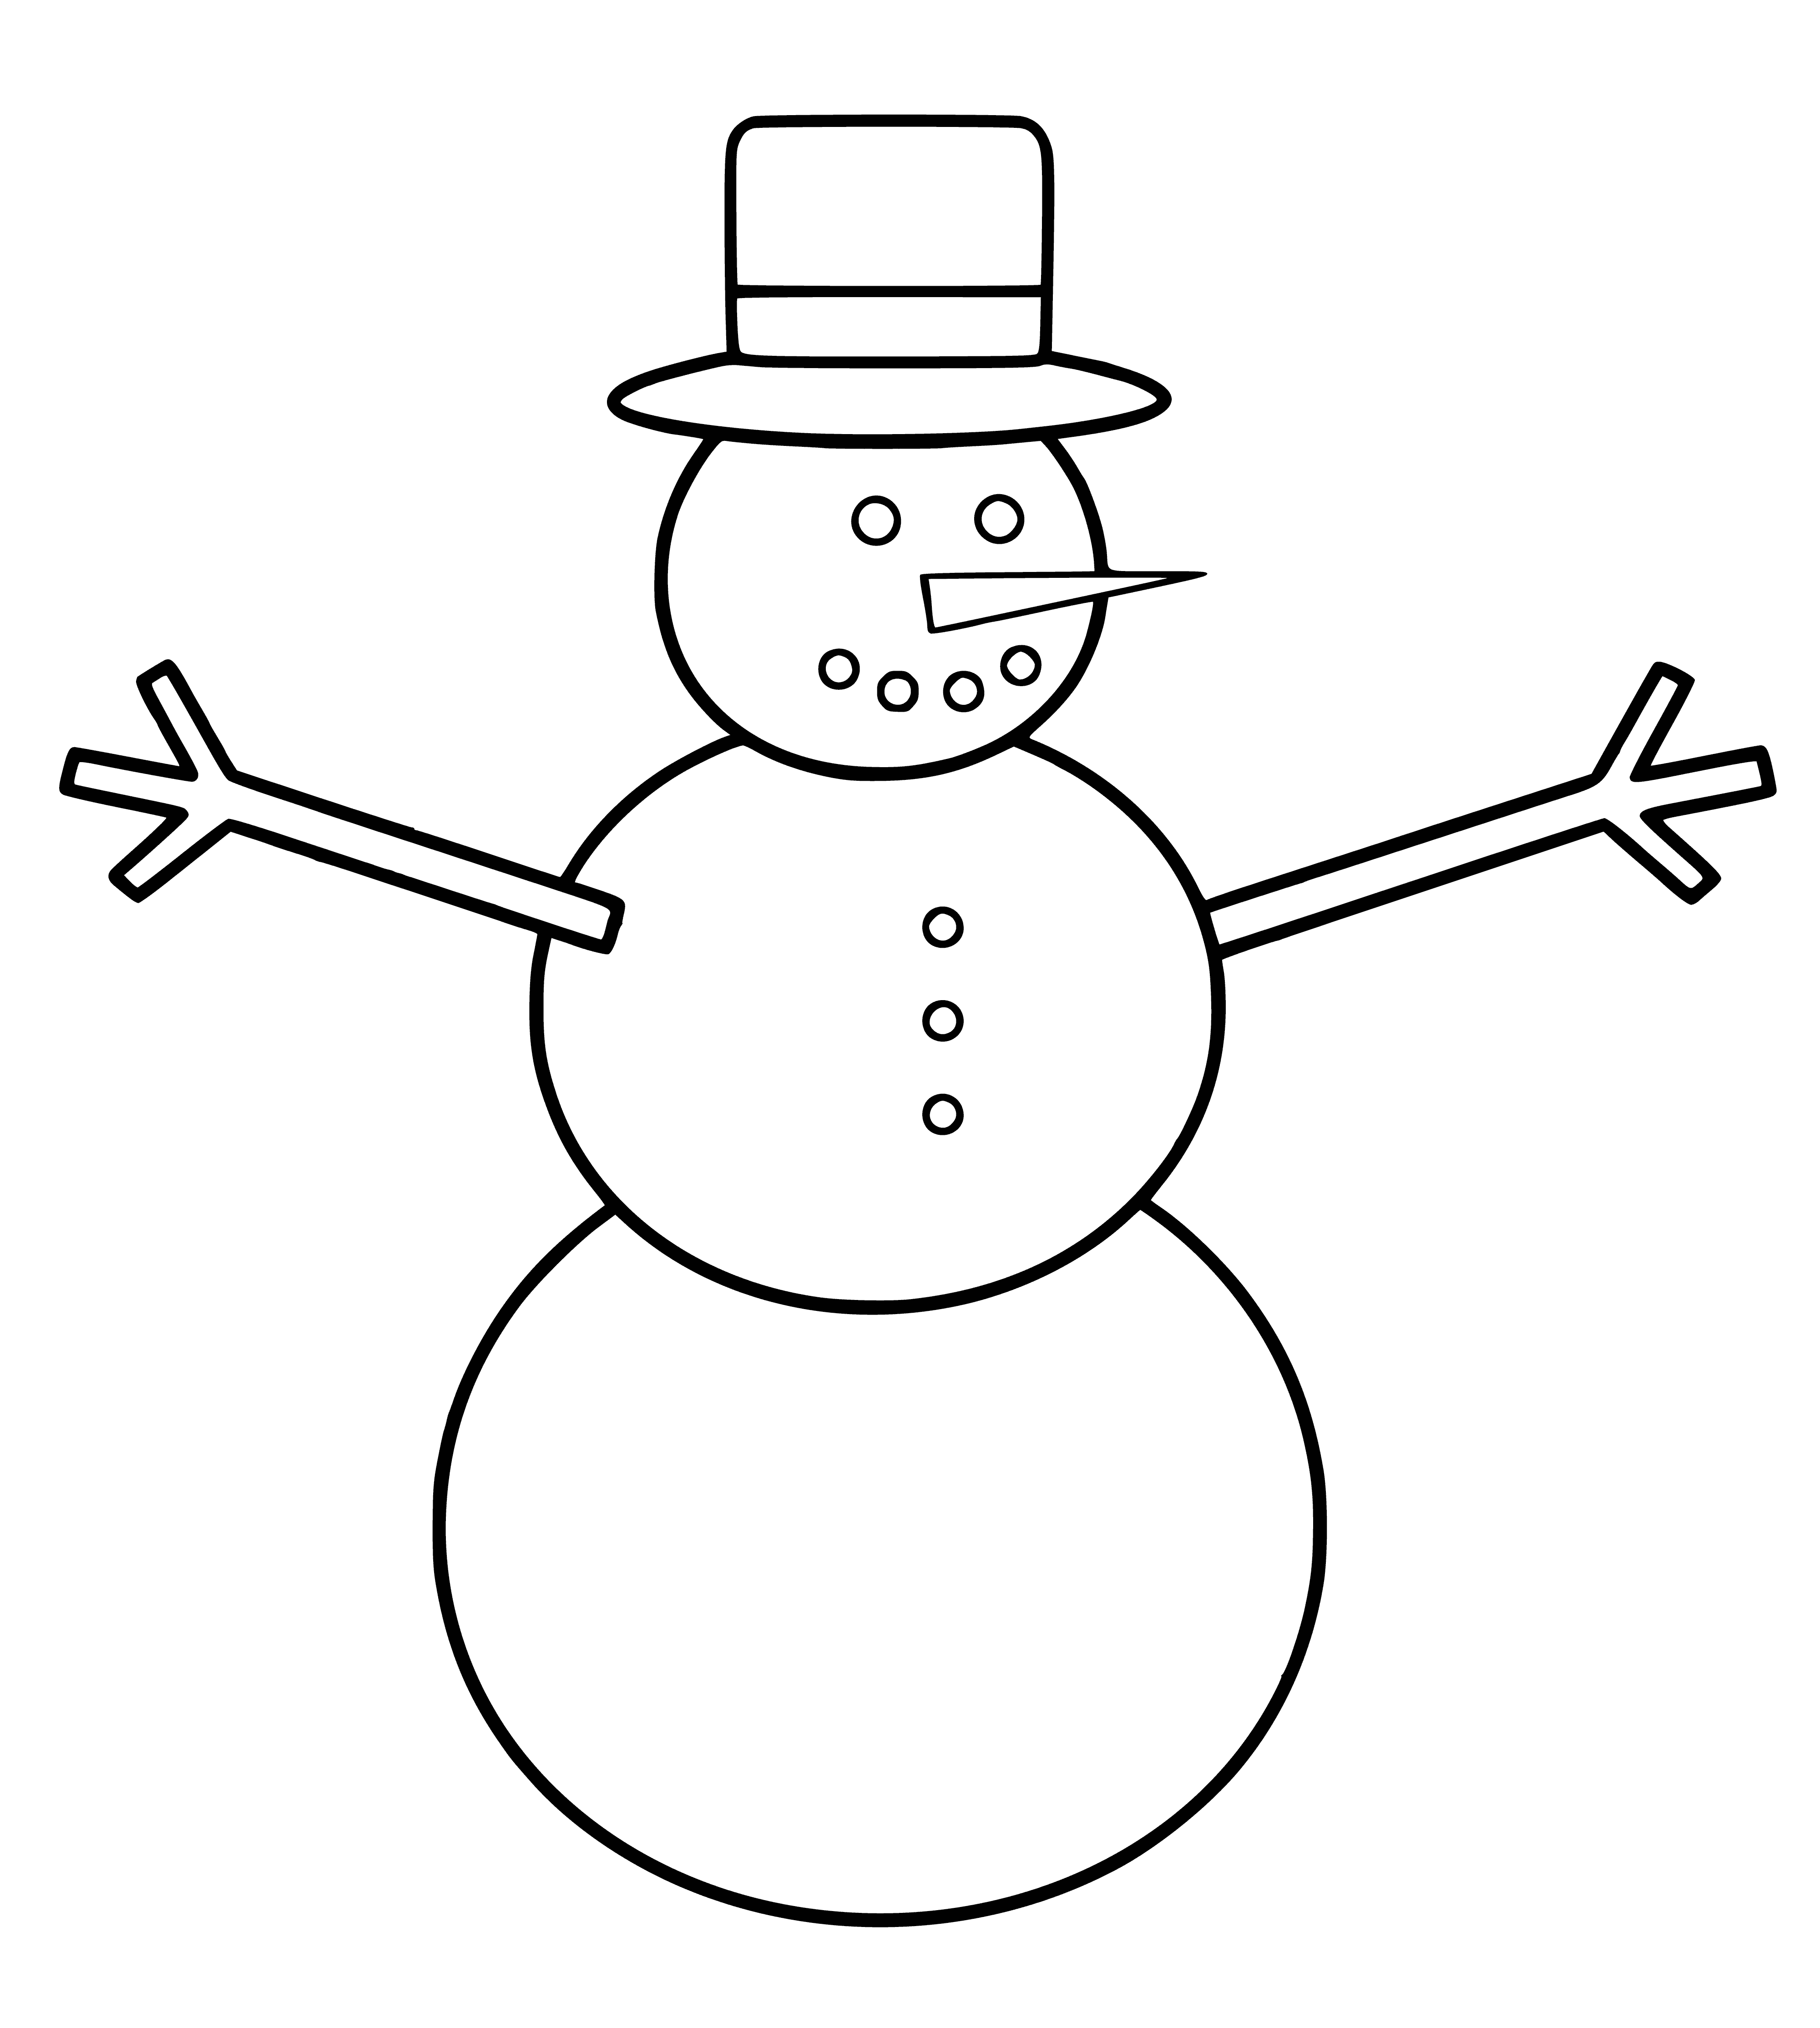 3 snowmen with diff. size, carrot, black & green button noses, coal eyes, red, blue & orange scarves & top hats in diff. colors.